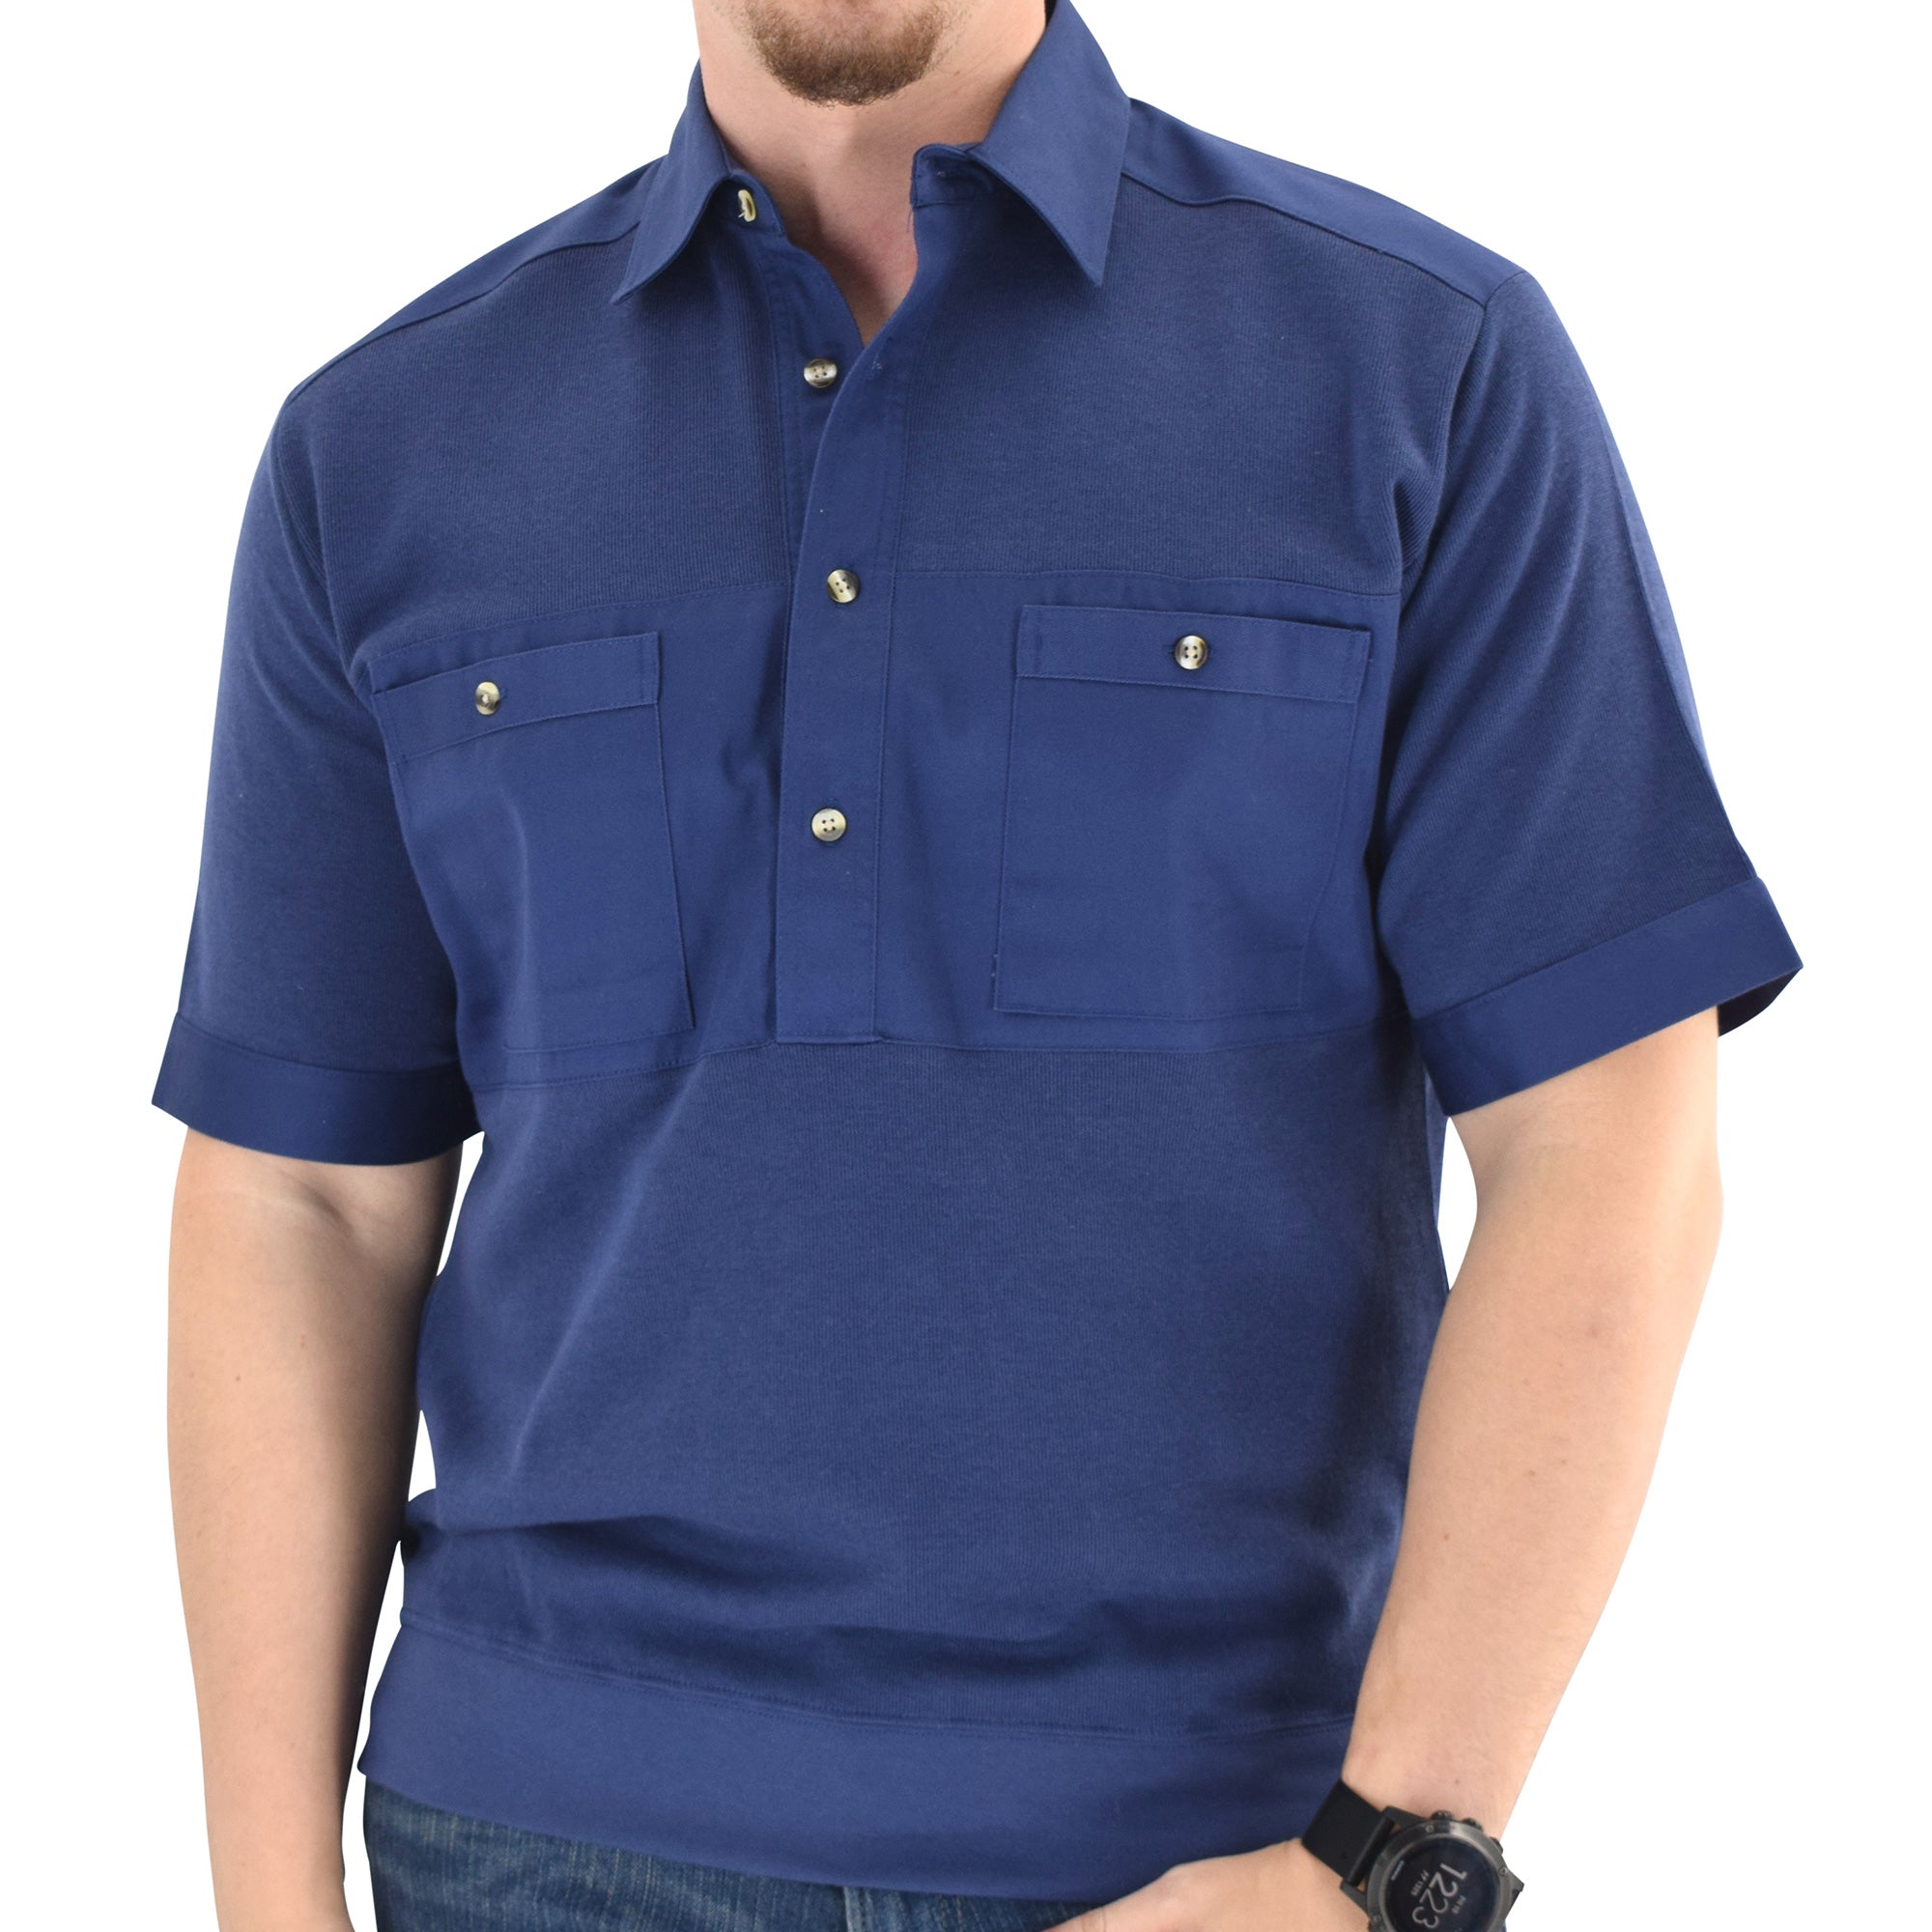 Solid Knit Banded Bottom Shirt with Woven Chest Panel 6041-22N - Navy - theflagshirt